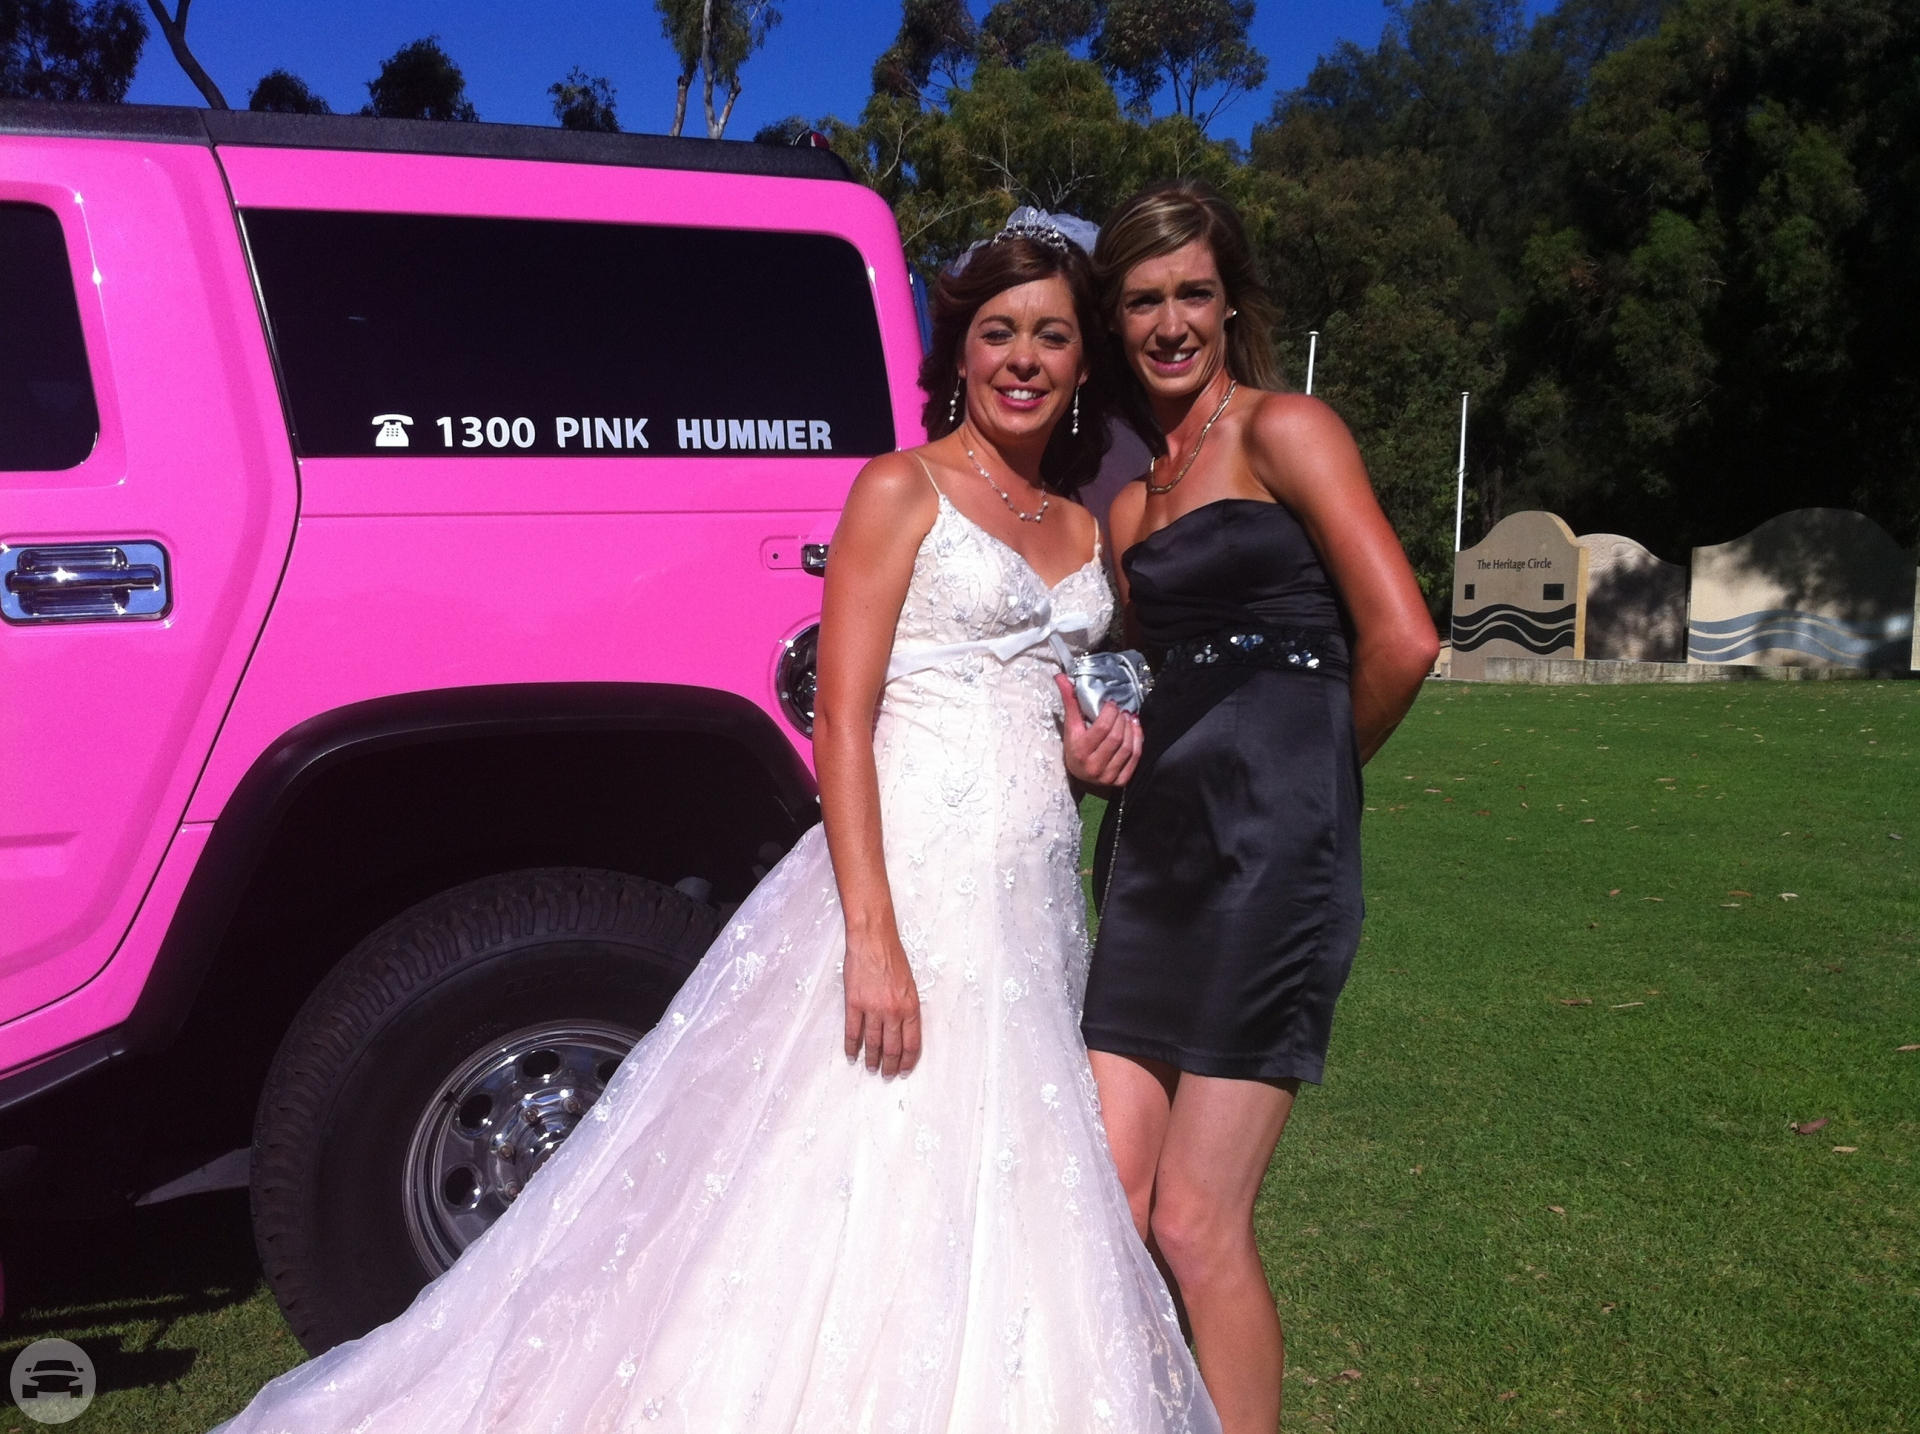 Our Brand New 2007 Luxury Stretch Limousine in Pink
Hummer /
Perth WA 6000, Australia

 / Hourly AUD$ 0.00
